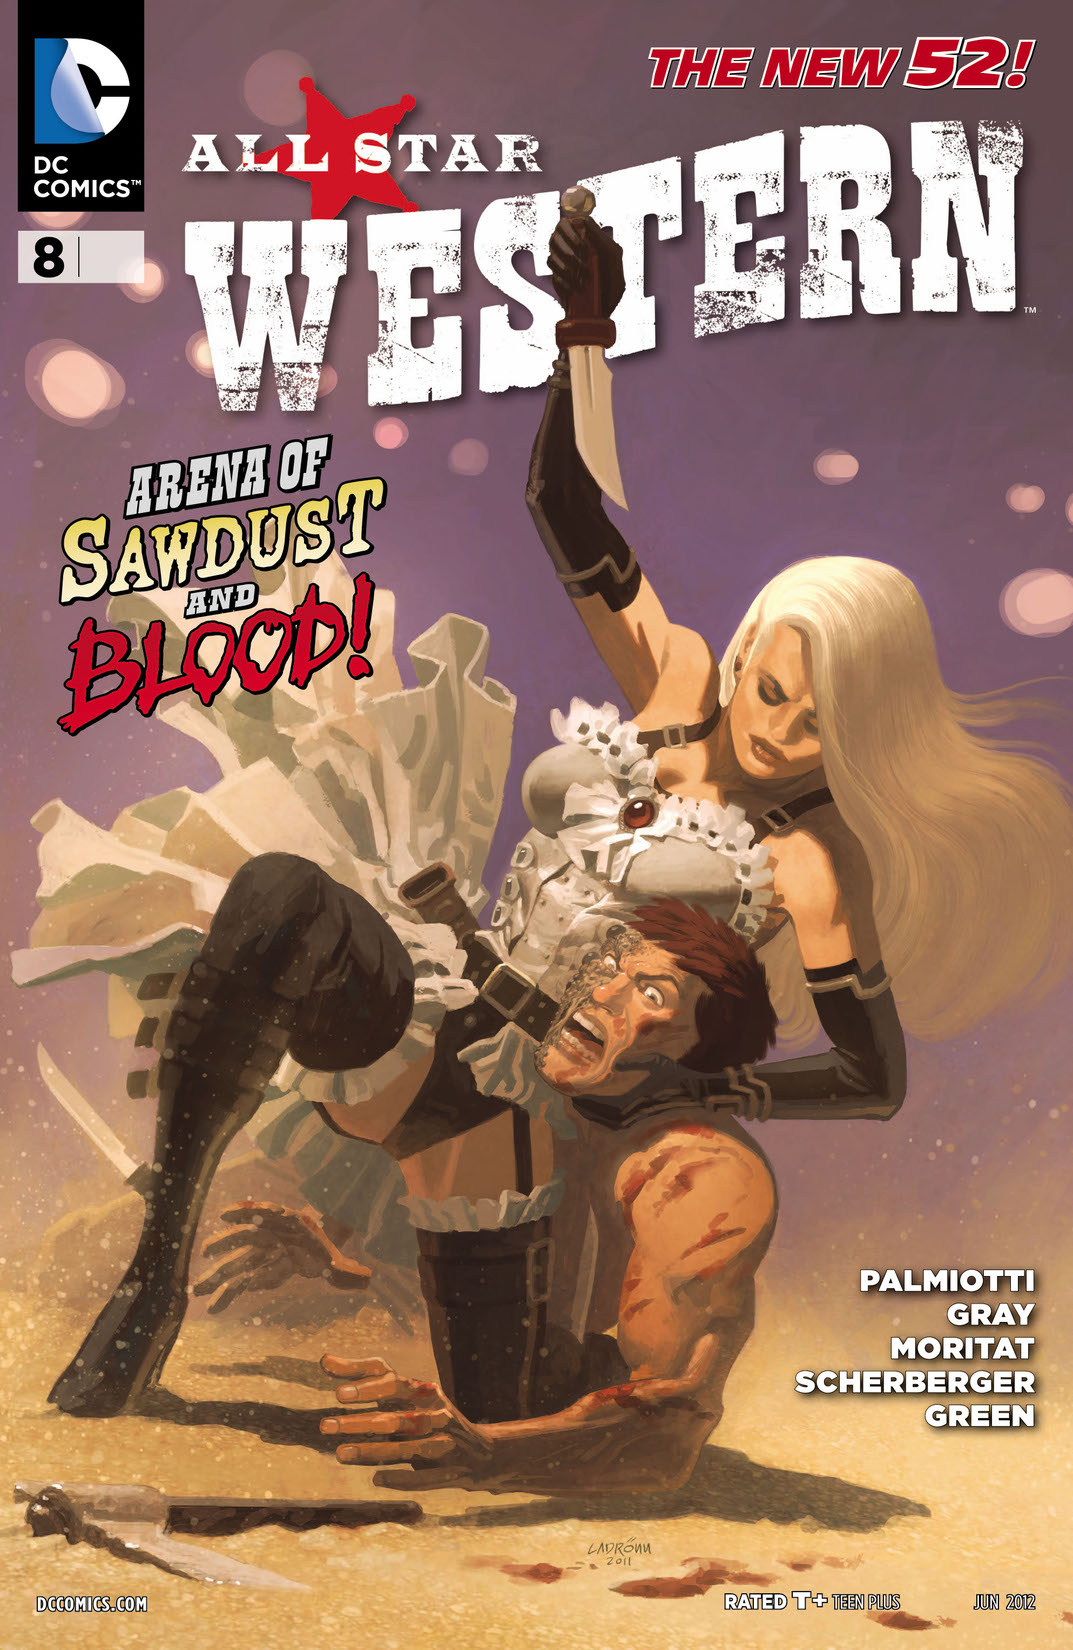 All Star Western #8 preview images